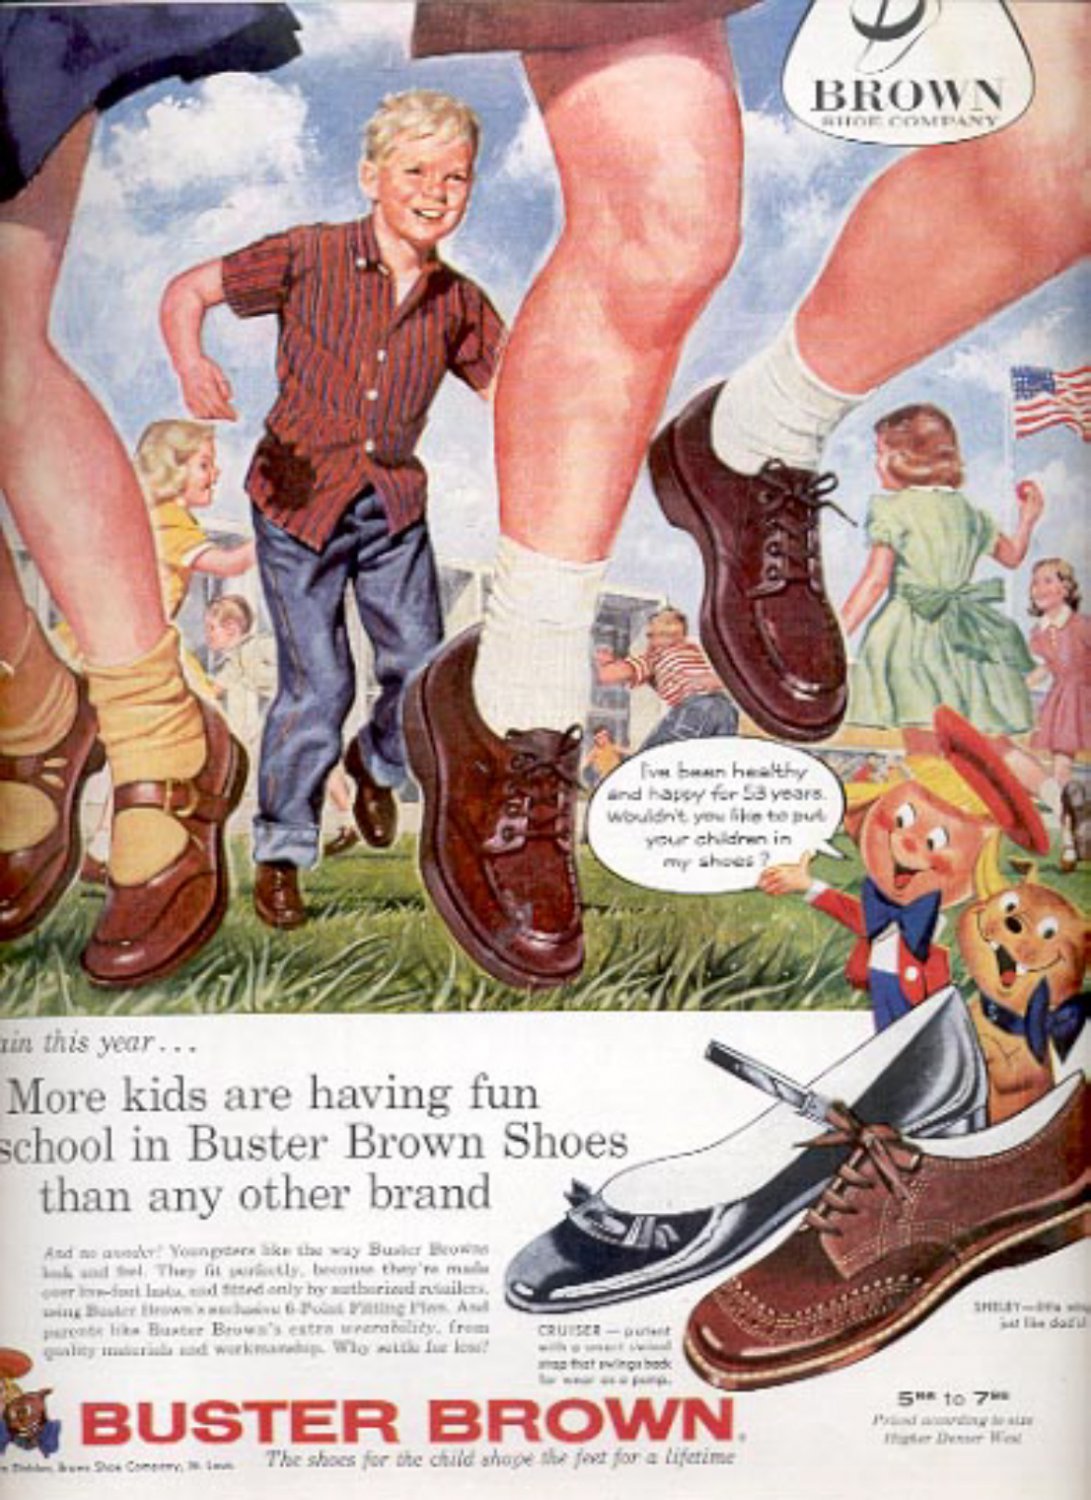 1957 Buster Brown Shoes magazine ad (# 4773)